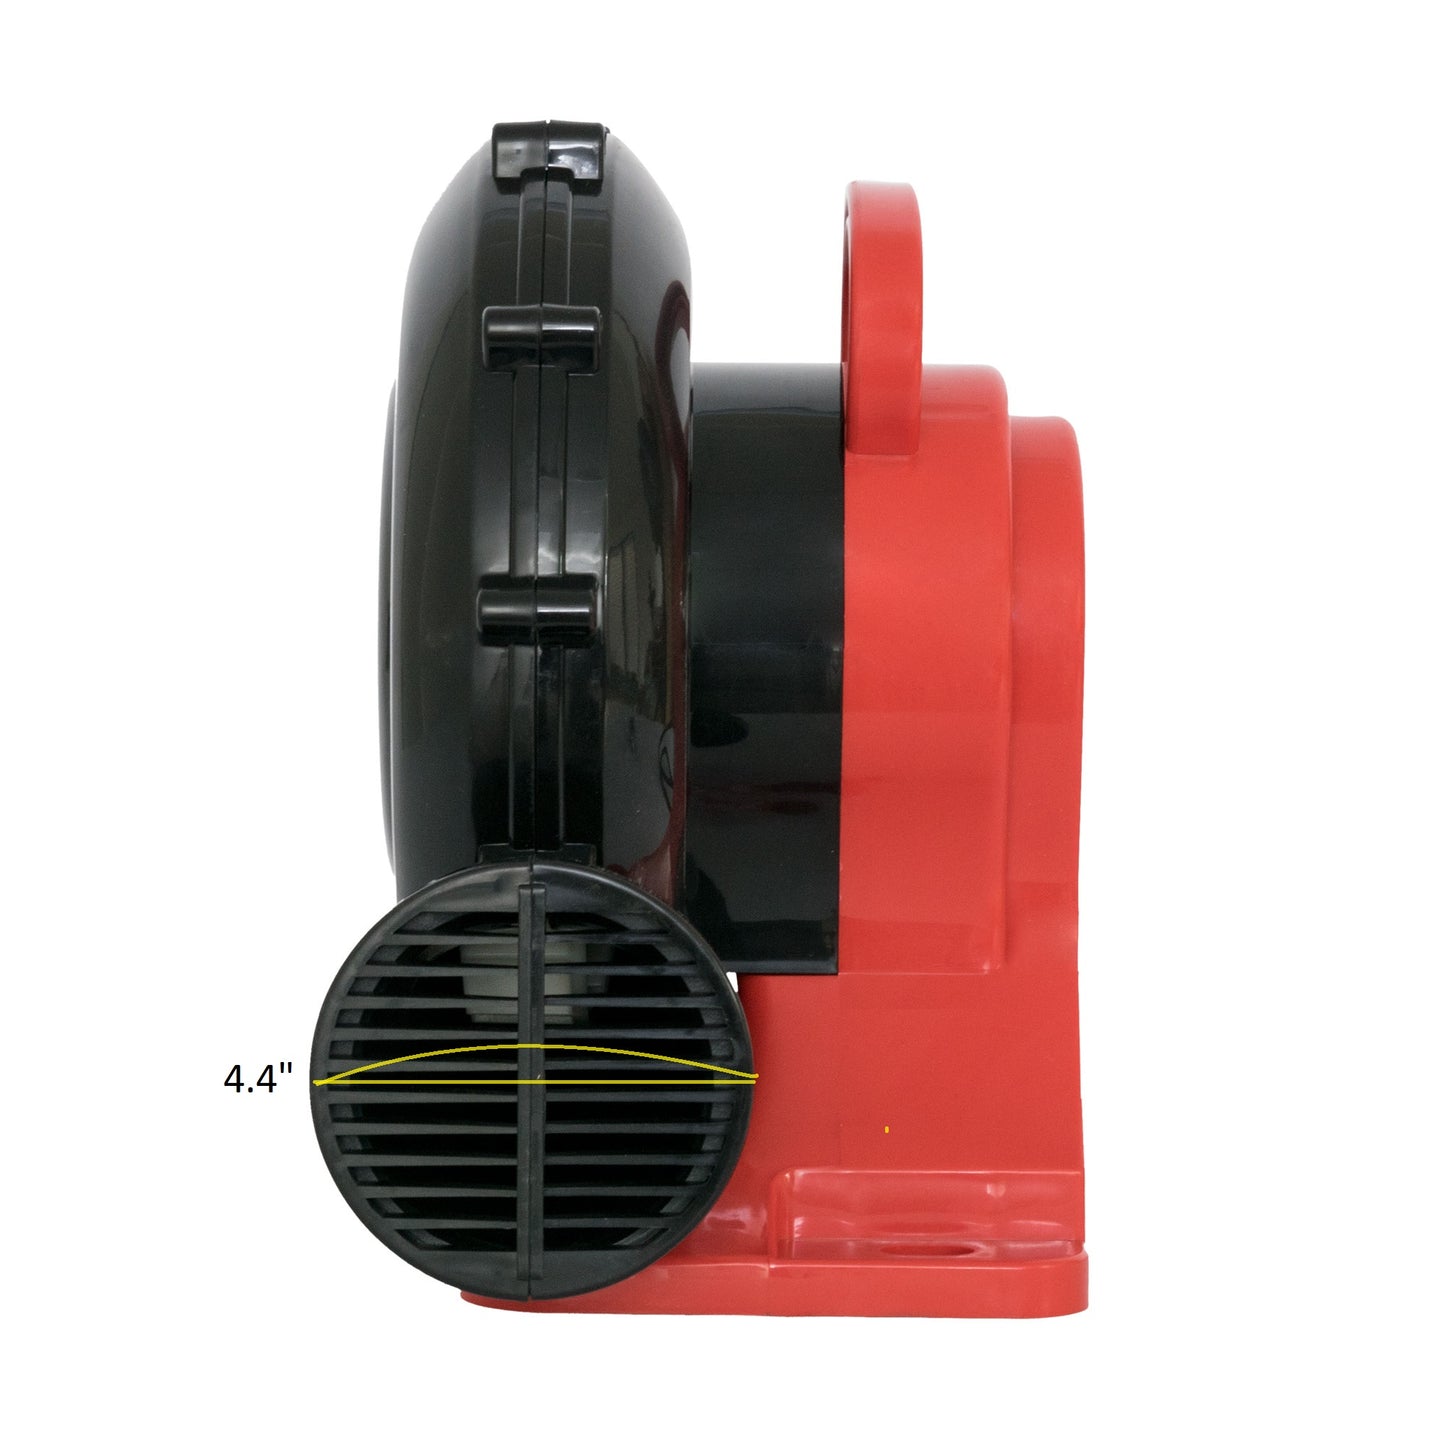 XPOWER BR-15 Indoor / Outdoor Inflatable Blower (1/4 HP)